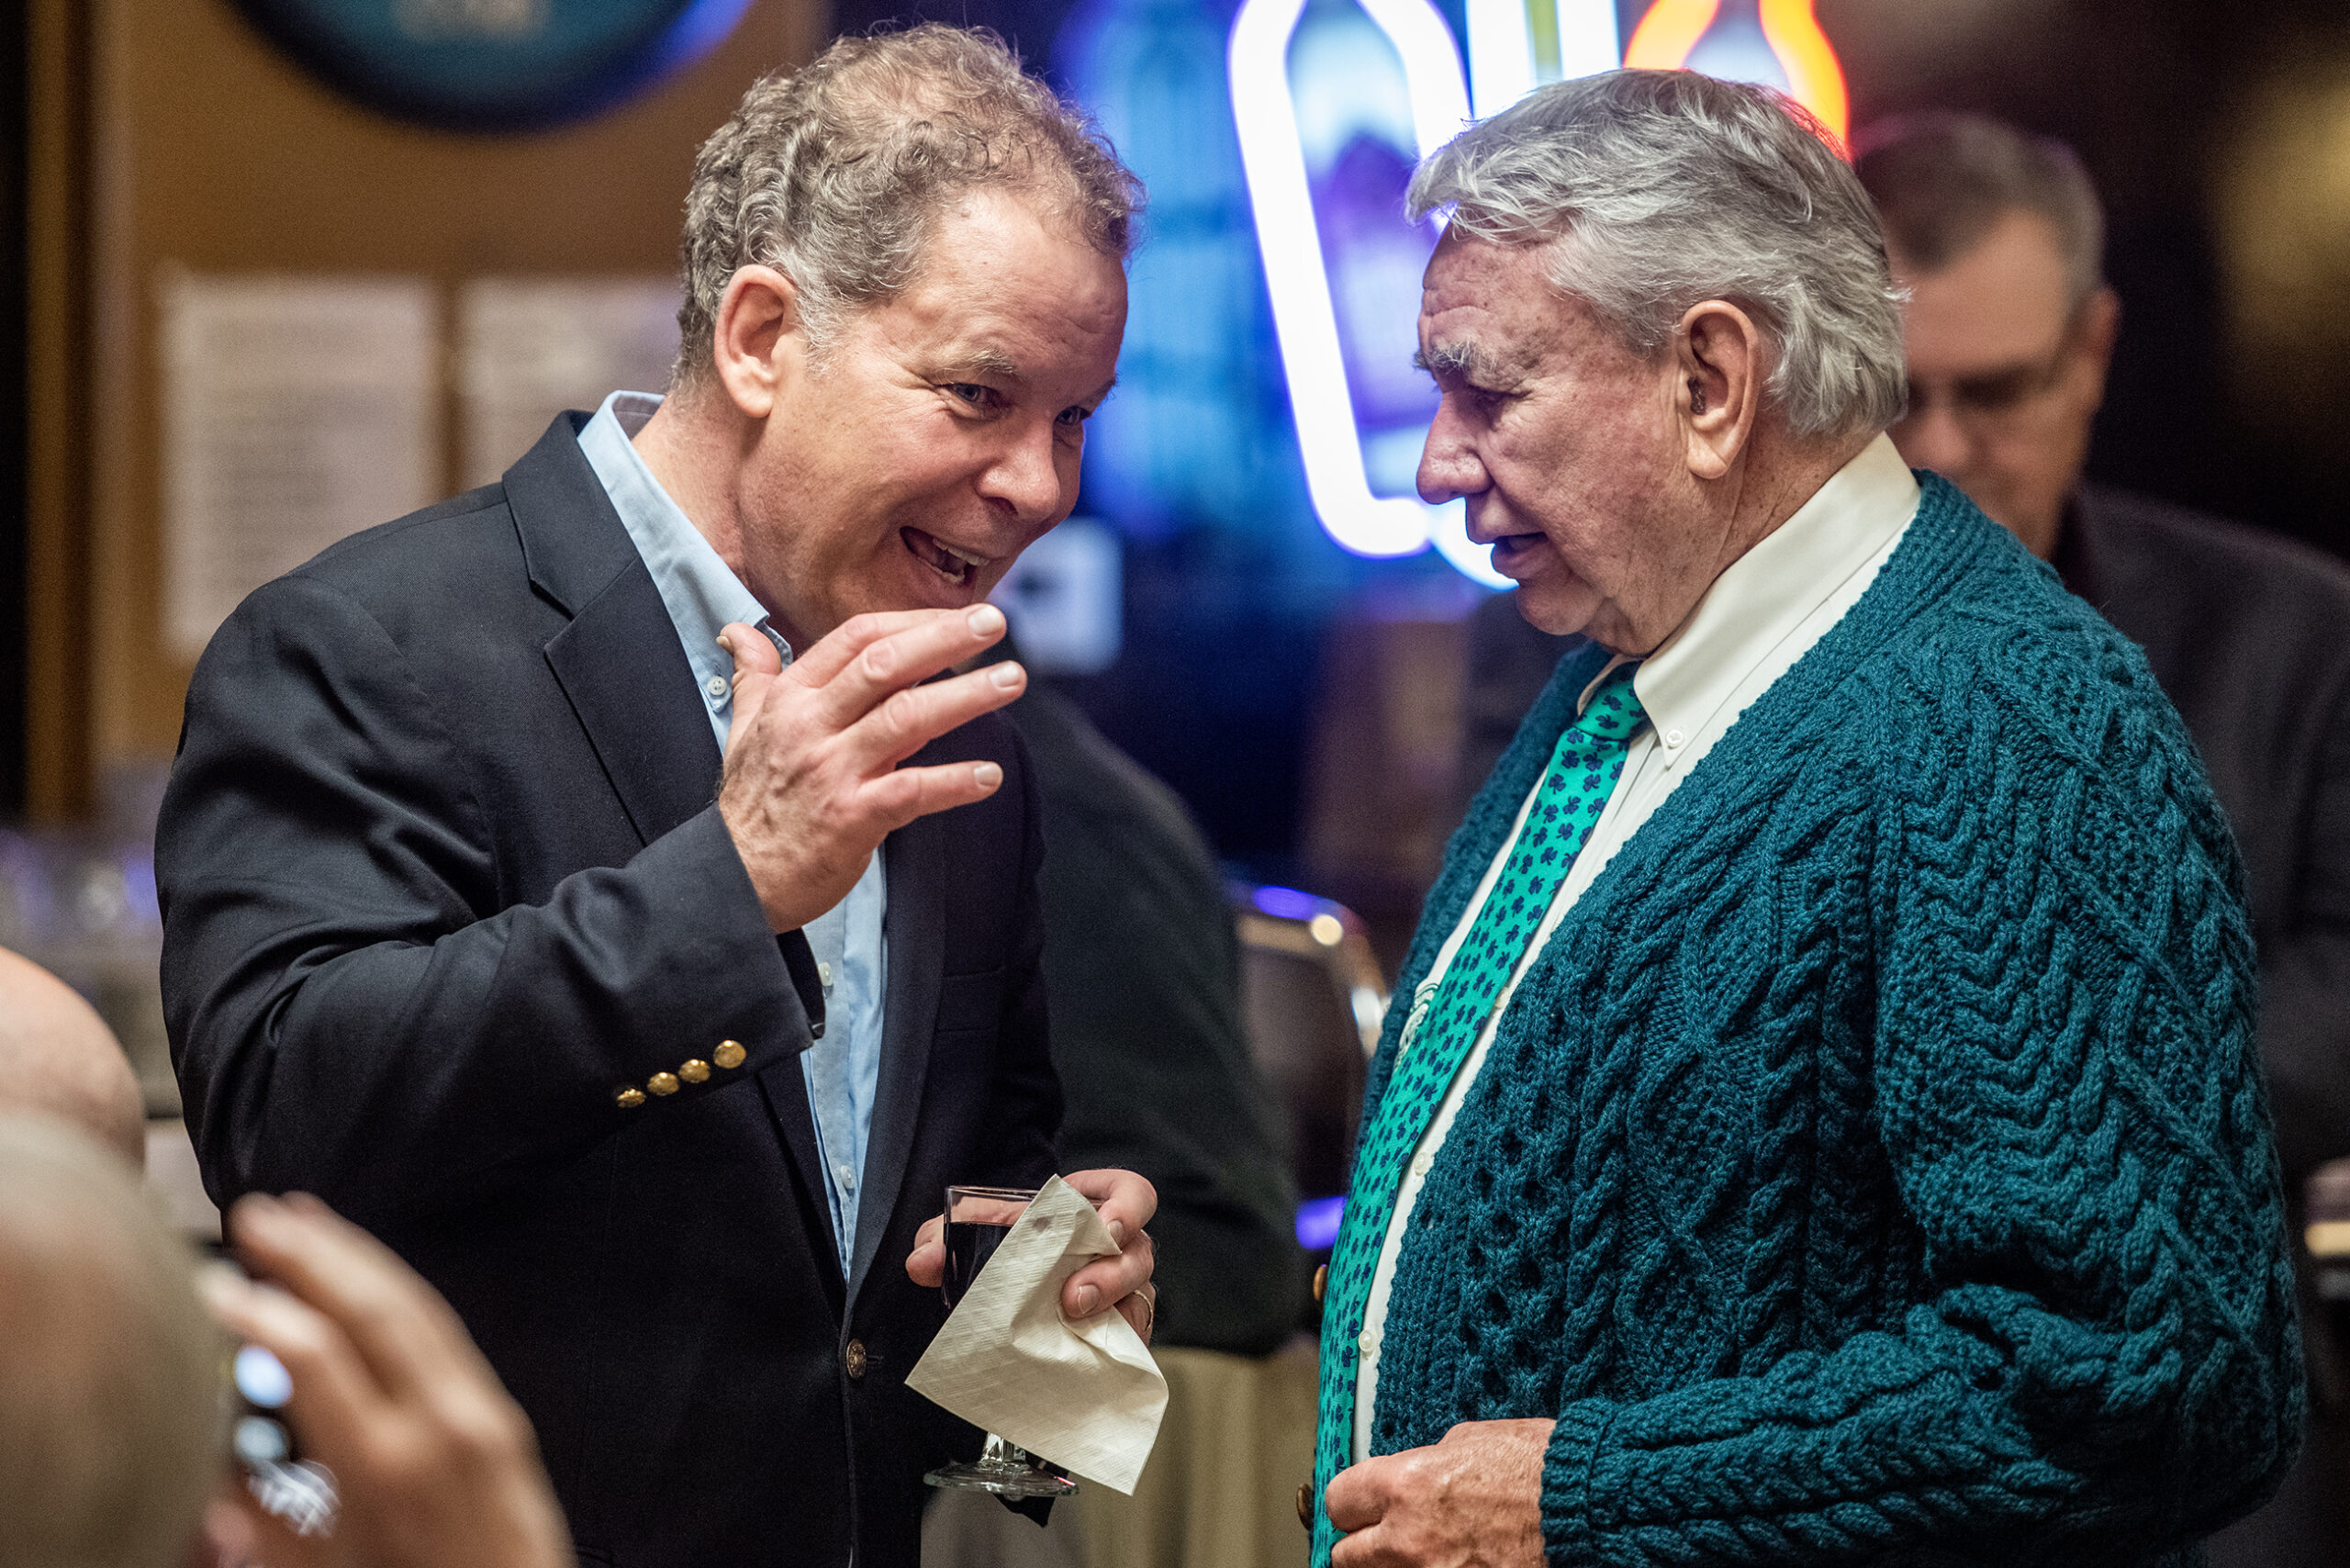 Dan Kelly speaks to Tommy Thompson in a supper club.